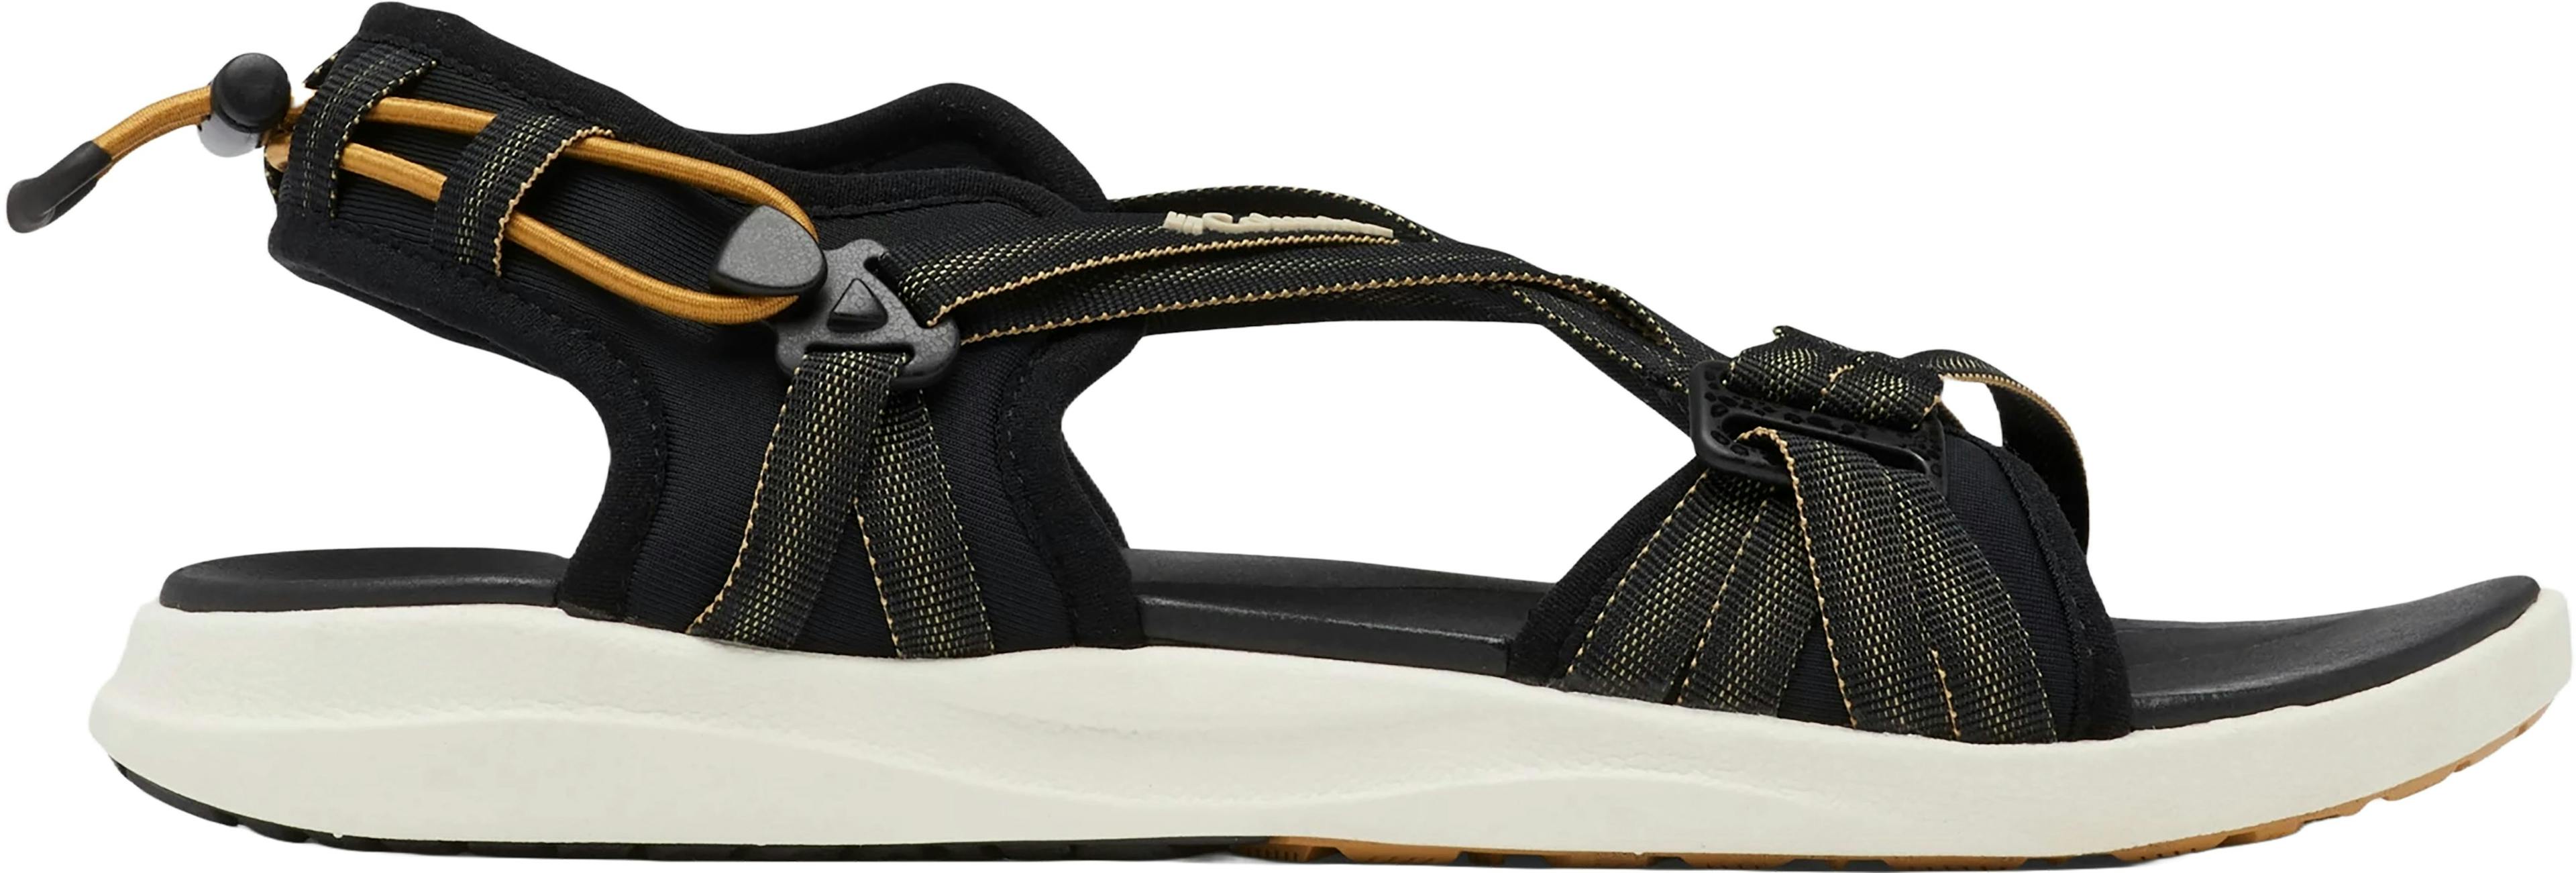 Product image for Columbia Sandal - Women's